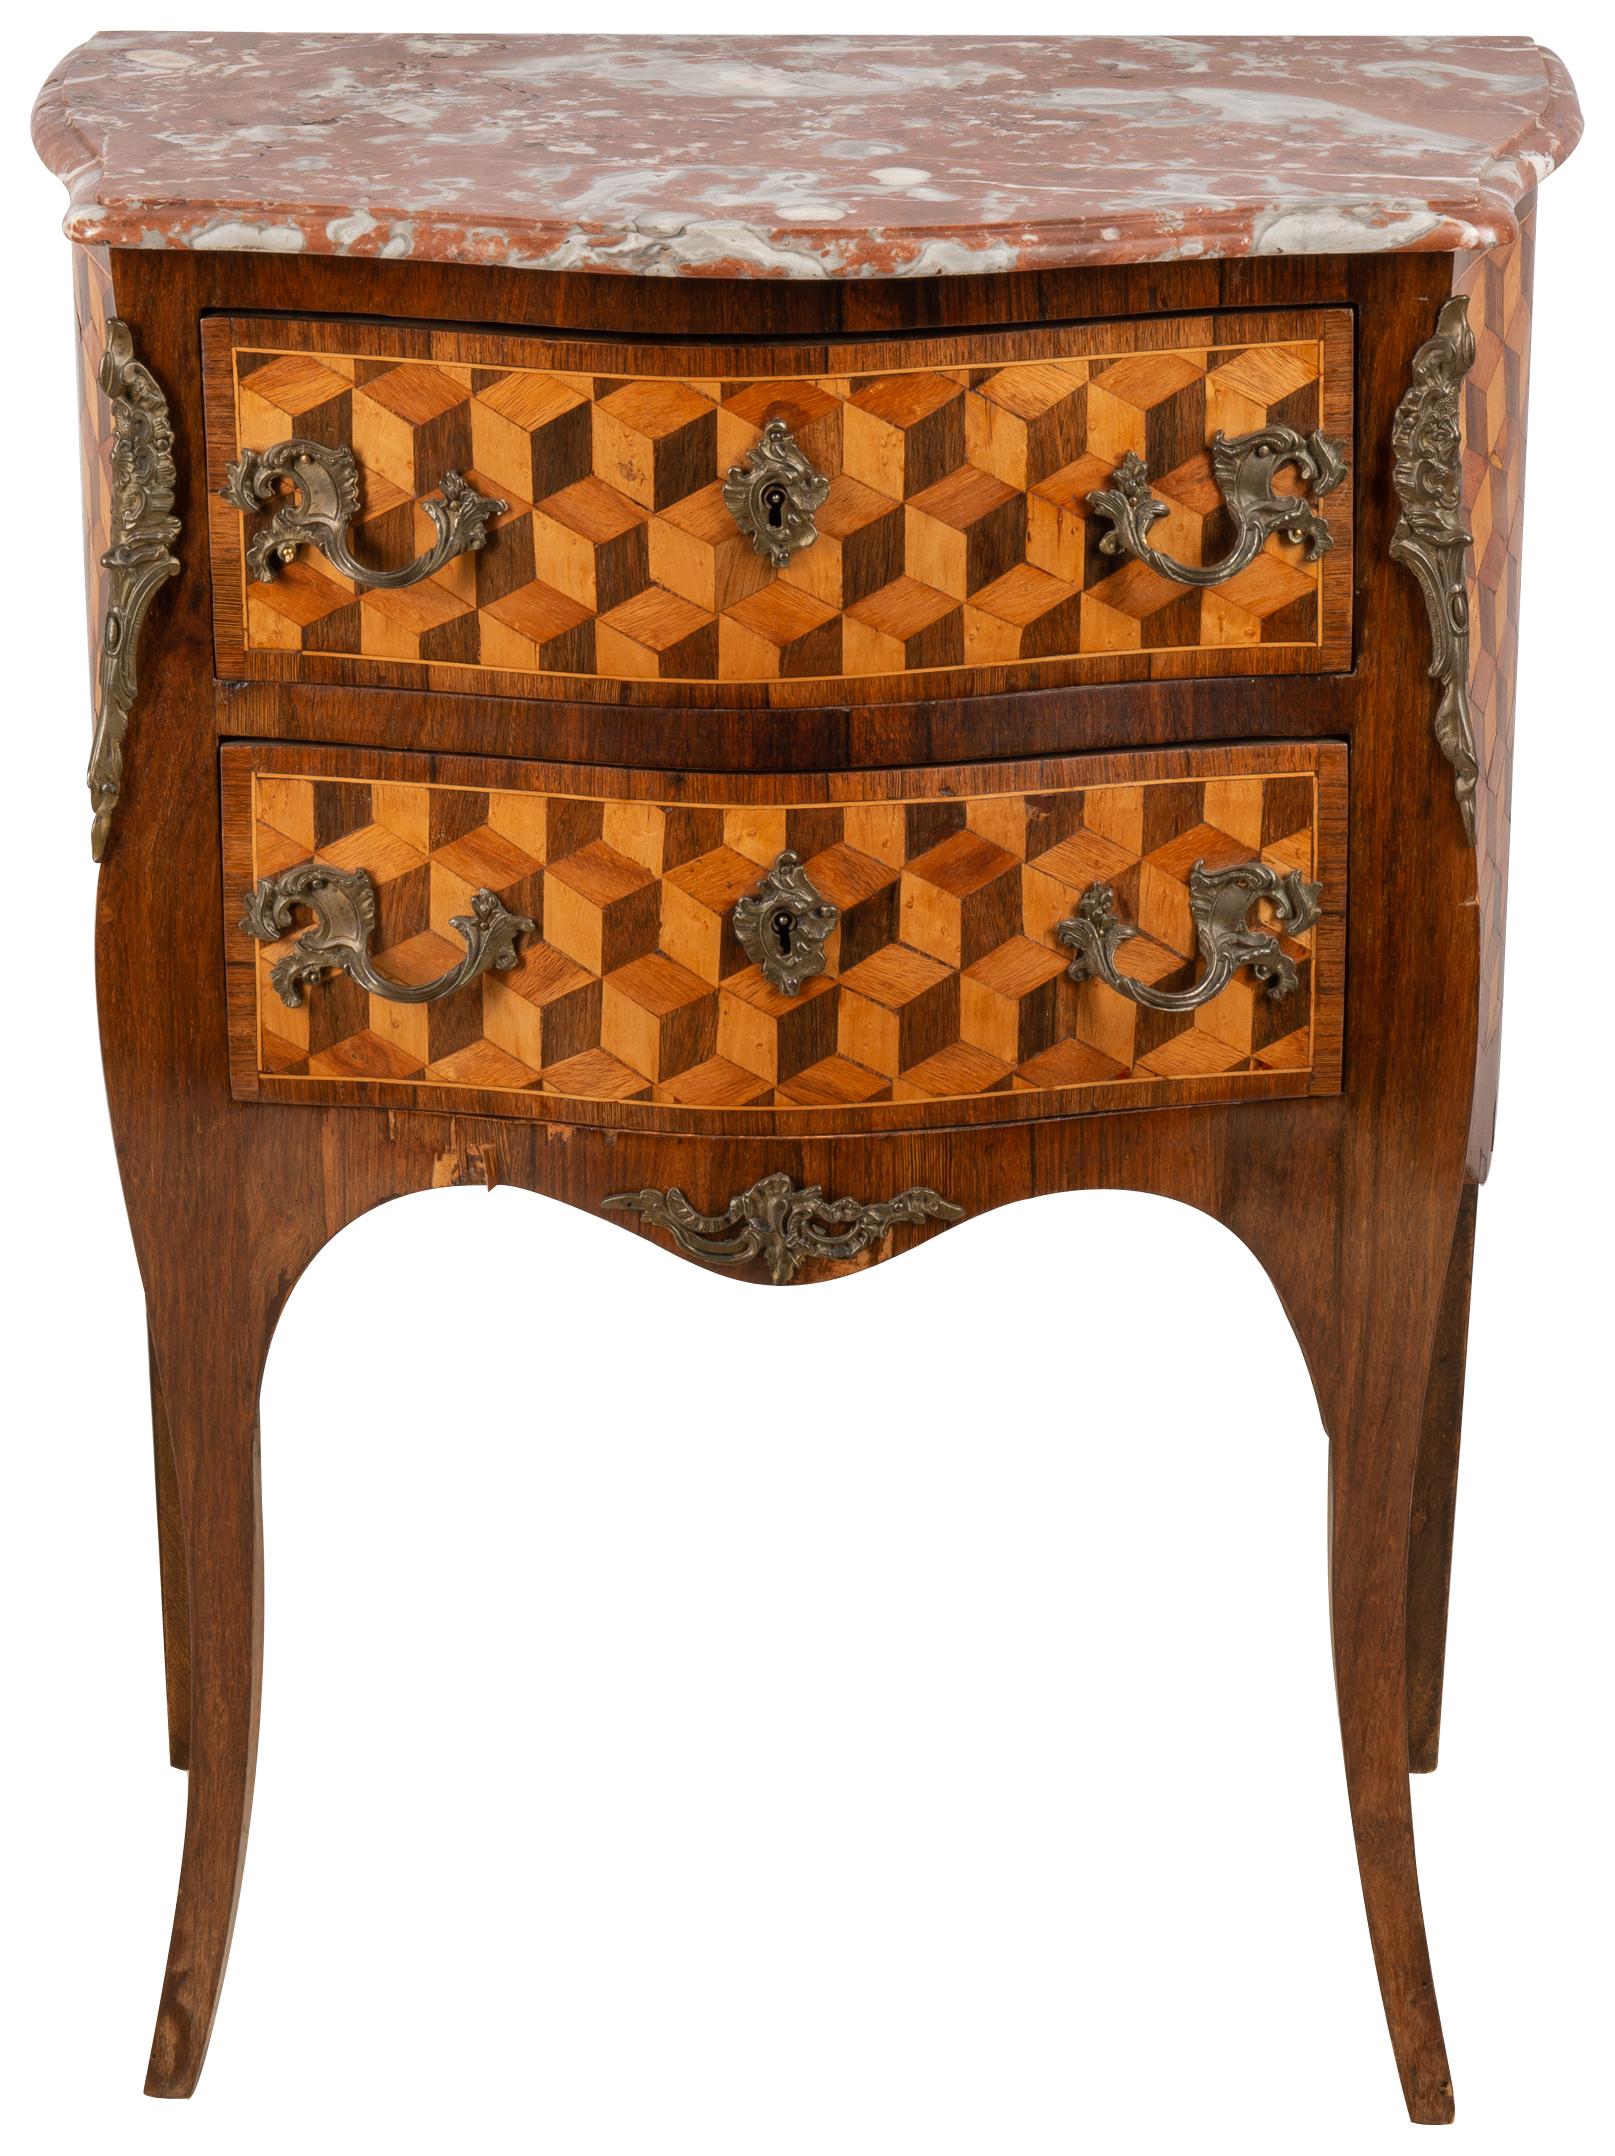 A very stylish late 19th century French Louis XVI style marble topped bombe fronted commode, having wonderful parquetry inlaid decoration to the front and side, ormolu handles, raised on out swept legs with ormolu feet.